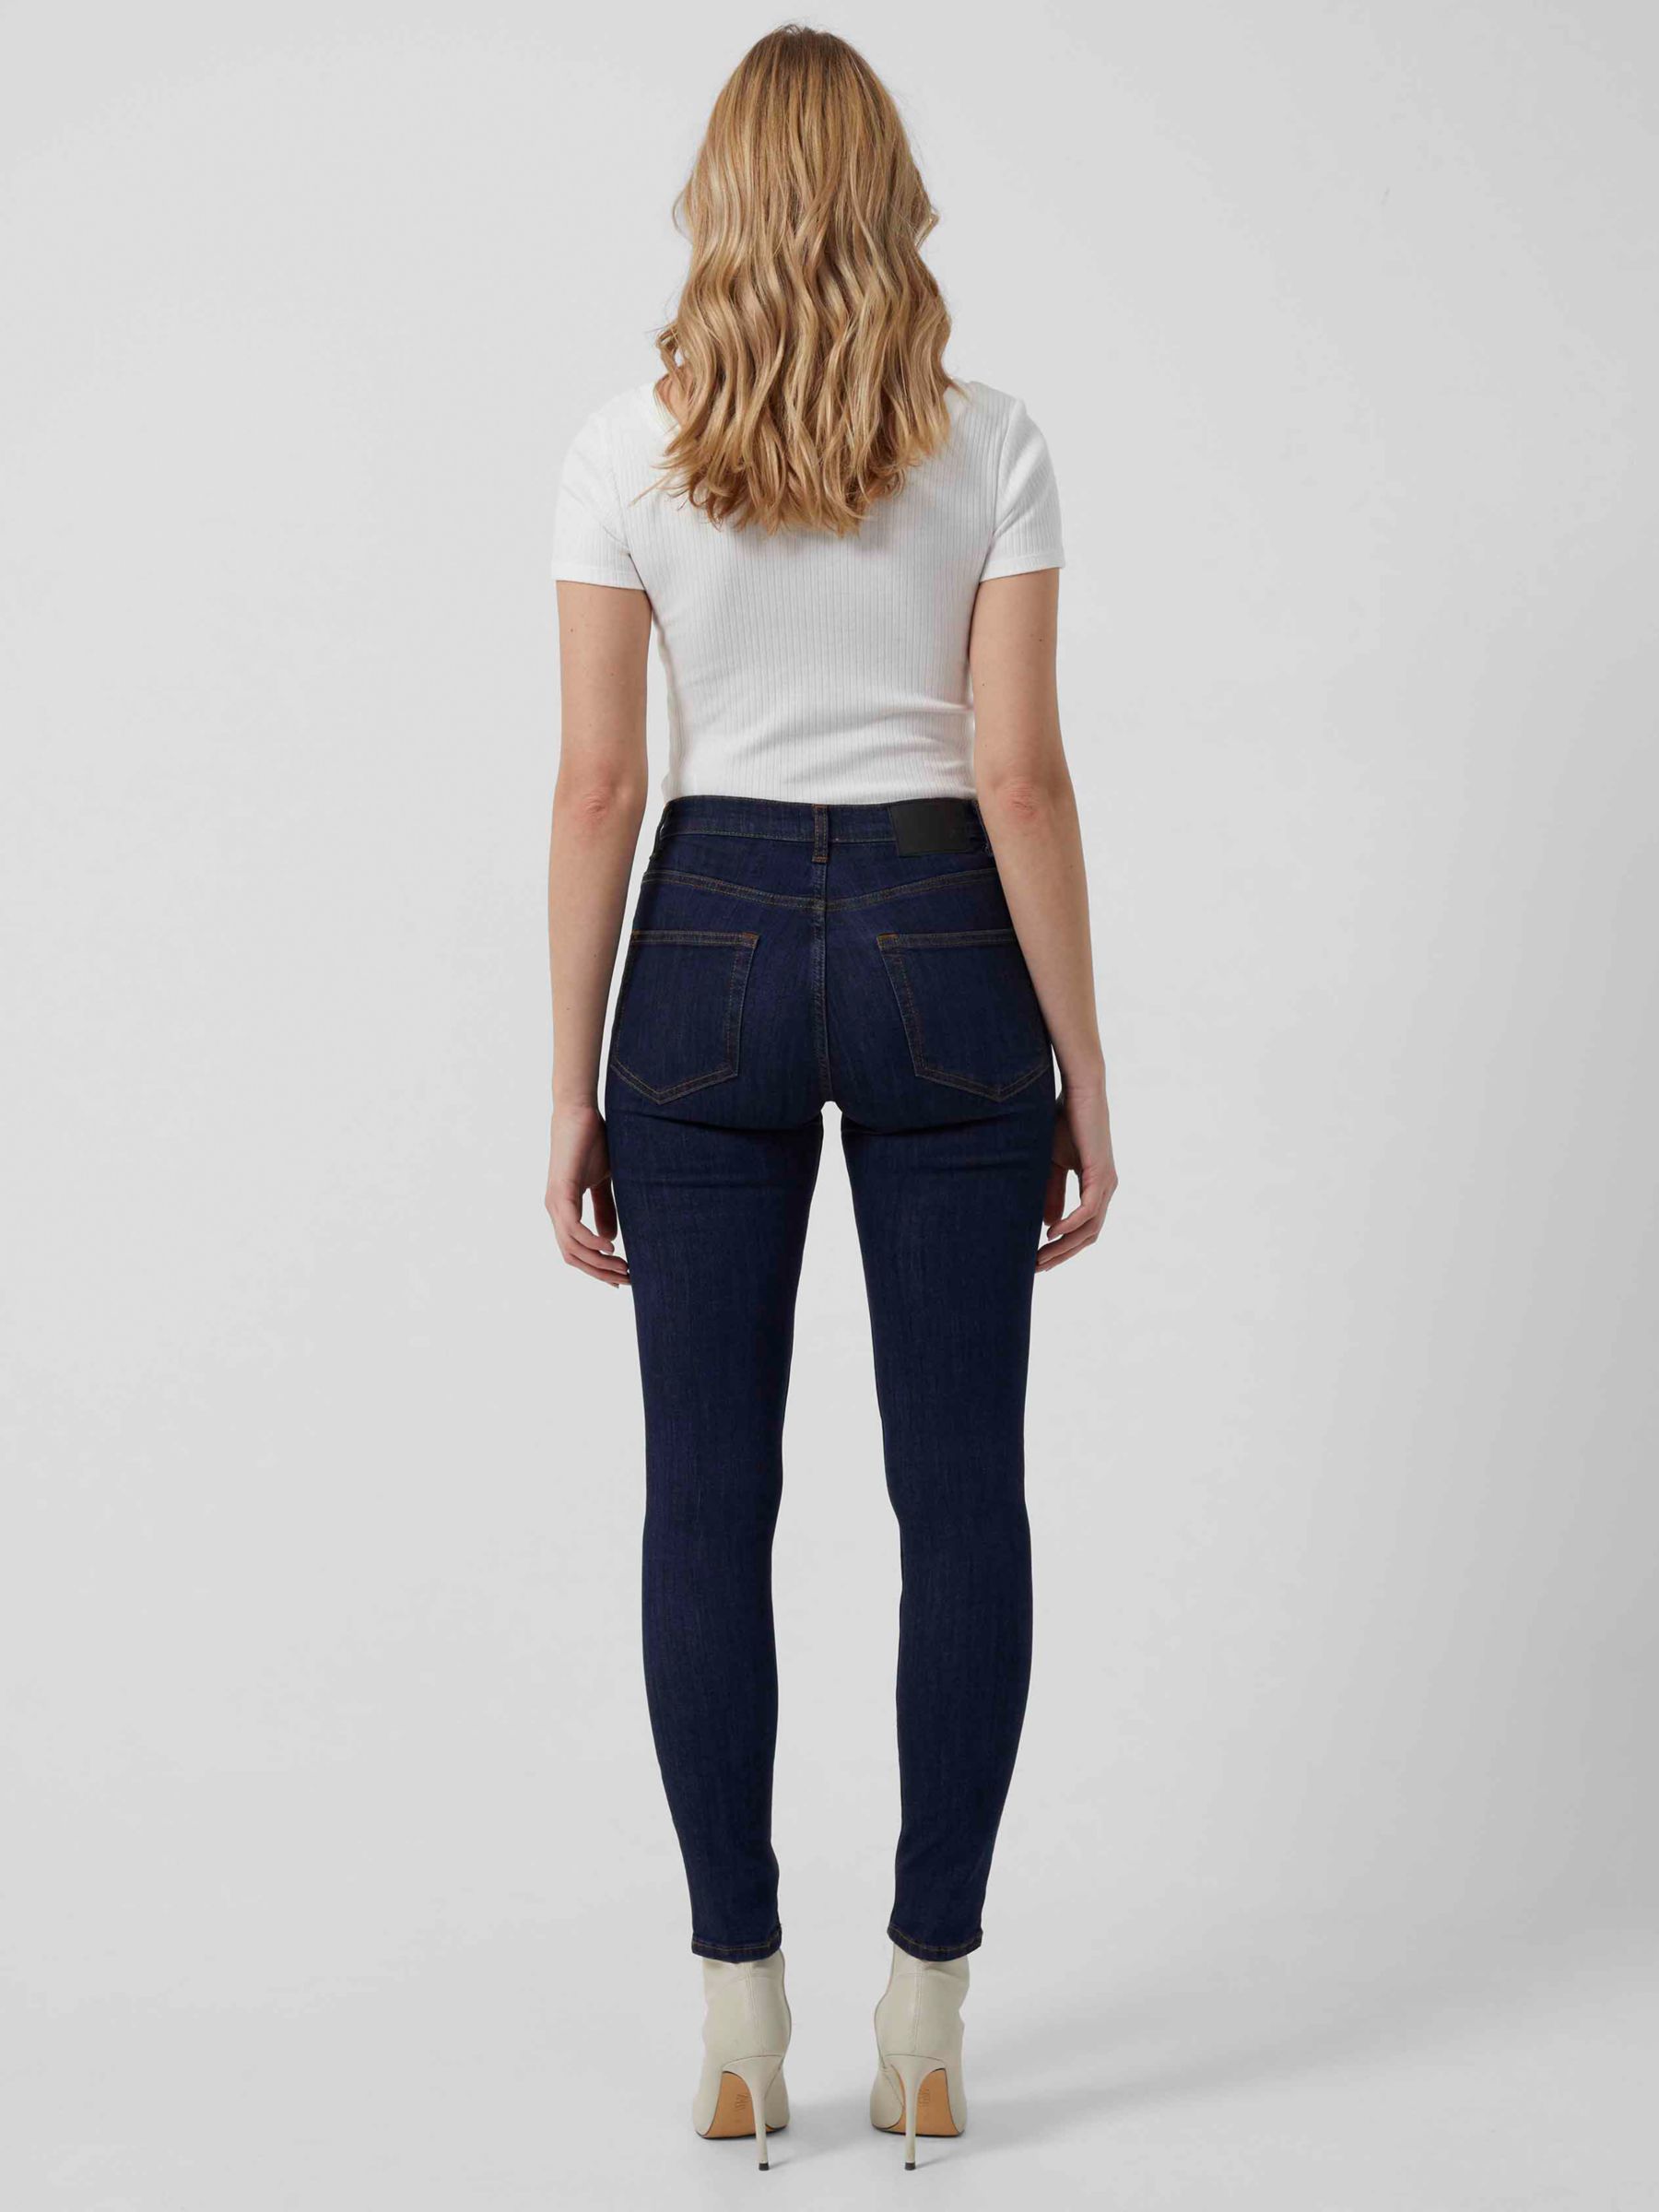 Buy French Connection Skinny Jeans, Blue/Black Online at johnlewis.com